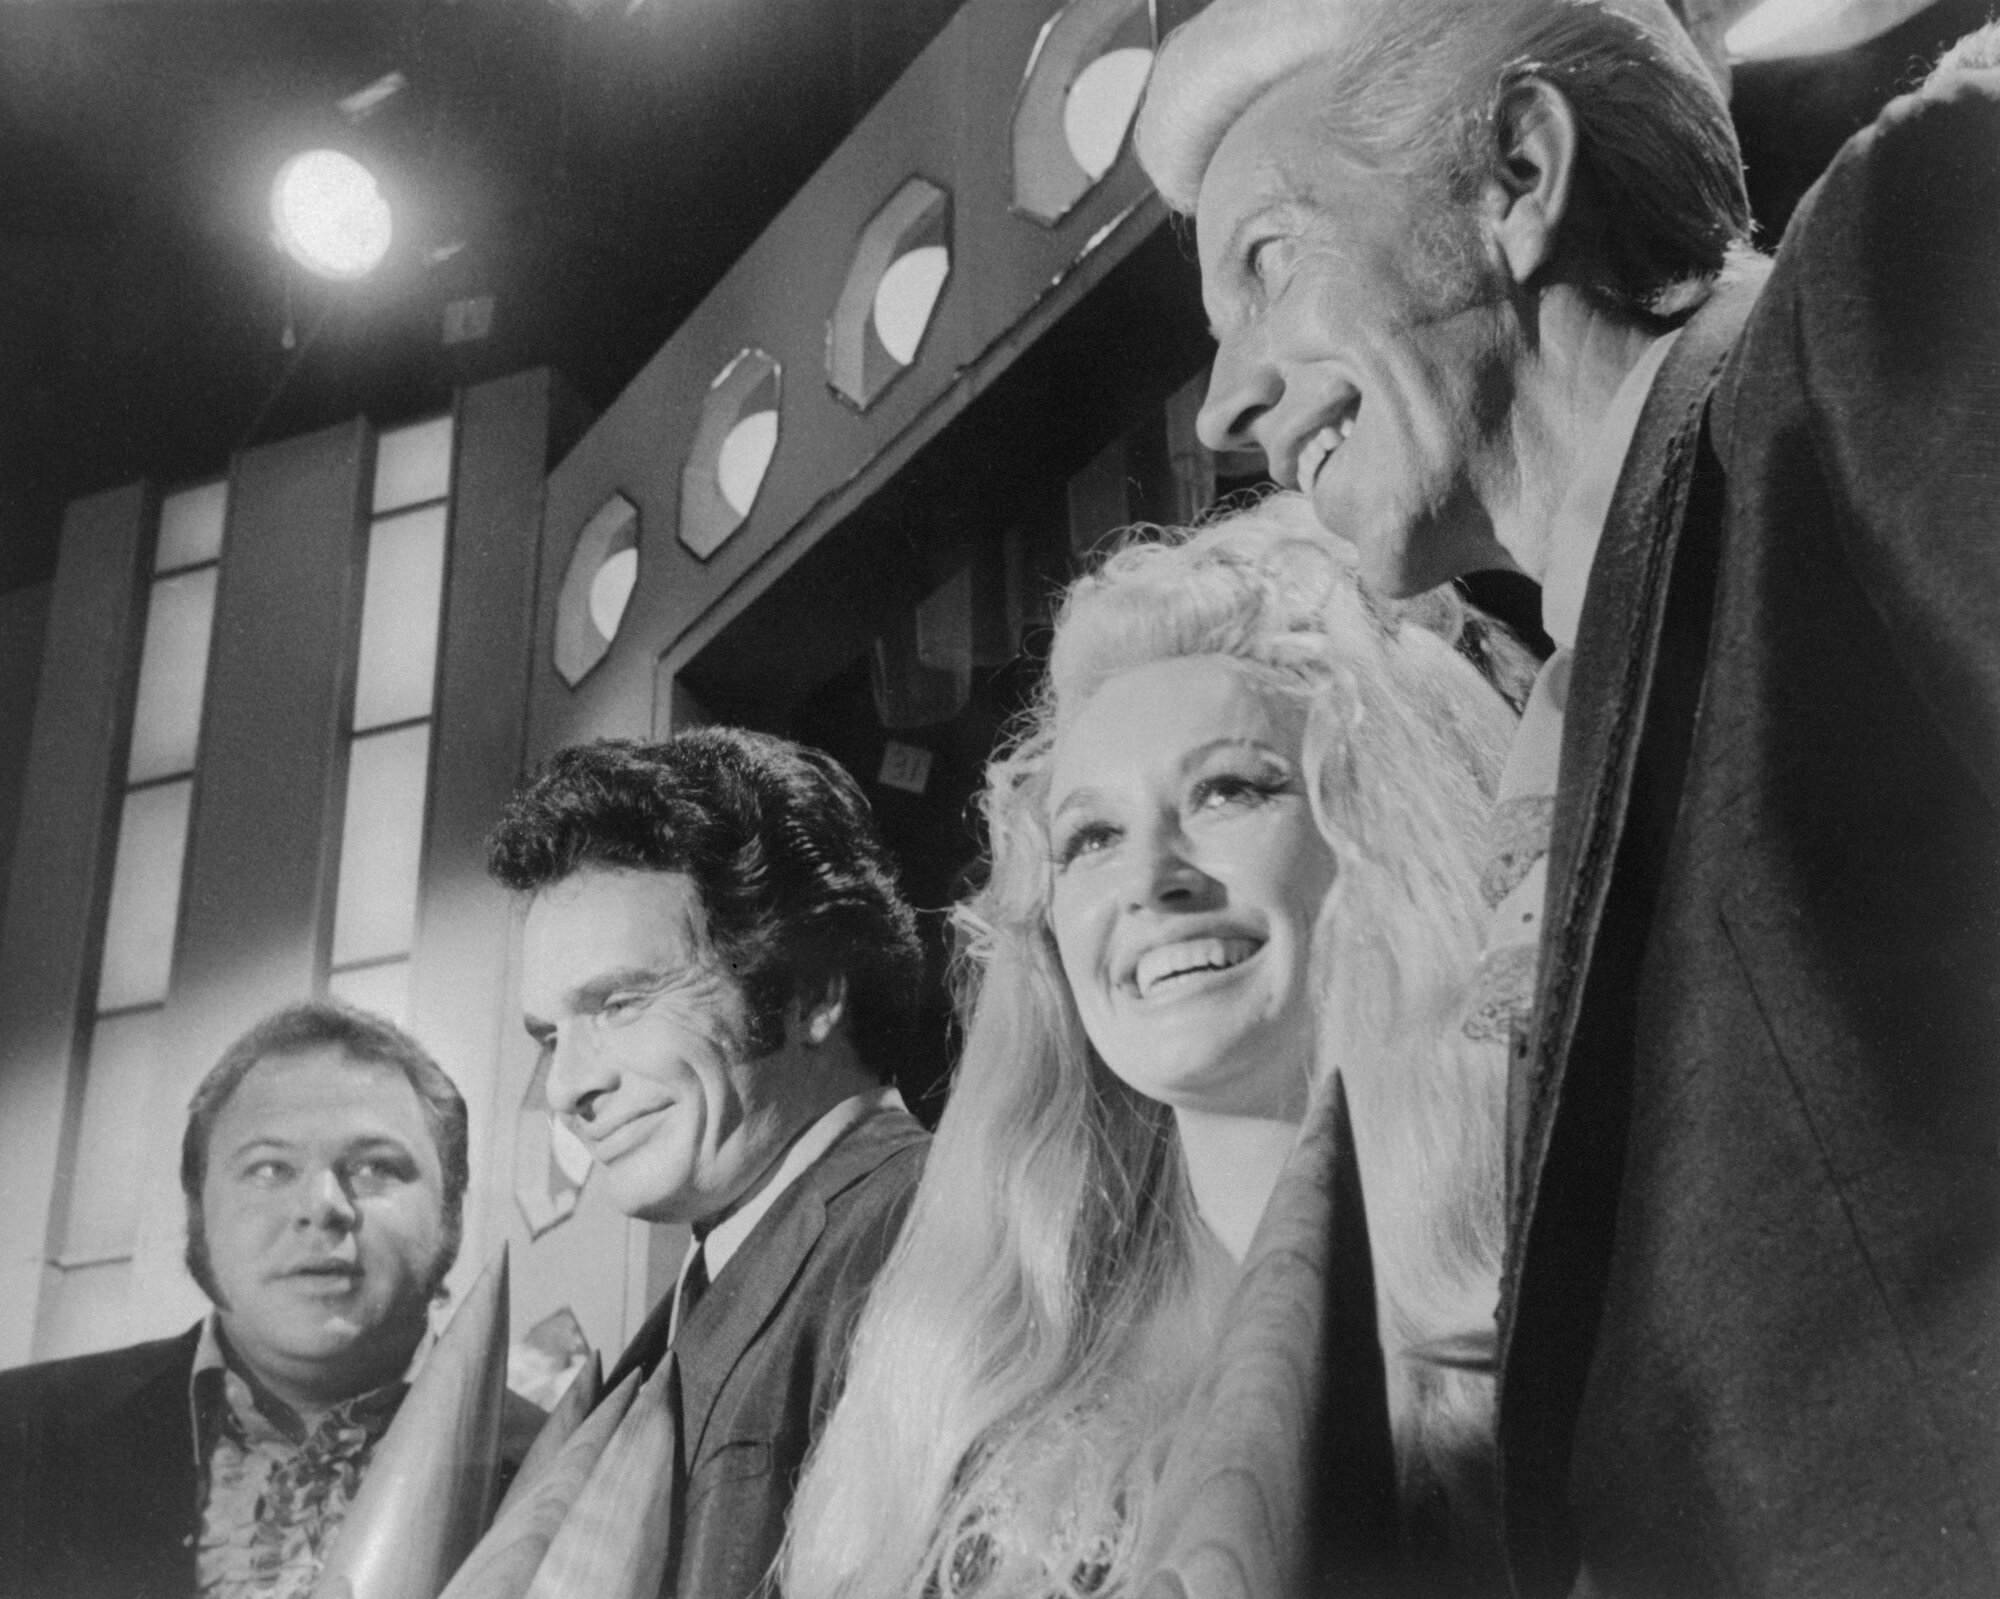 Roy Clark, Merle Haggard, Dolly Parton, and Porter Wagoner are shown here at the Country Music Association annual awards show.